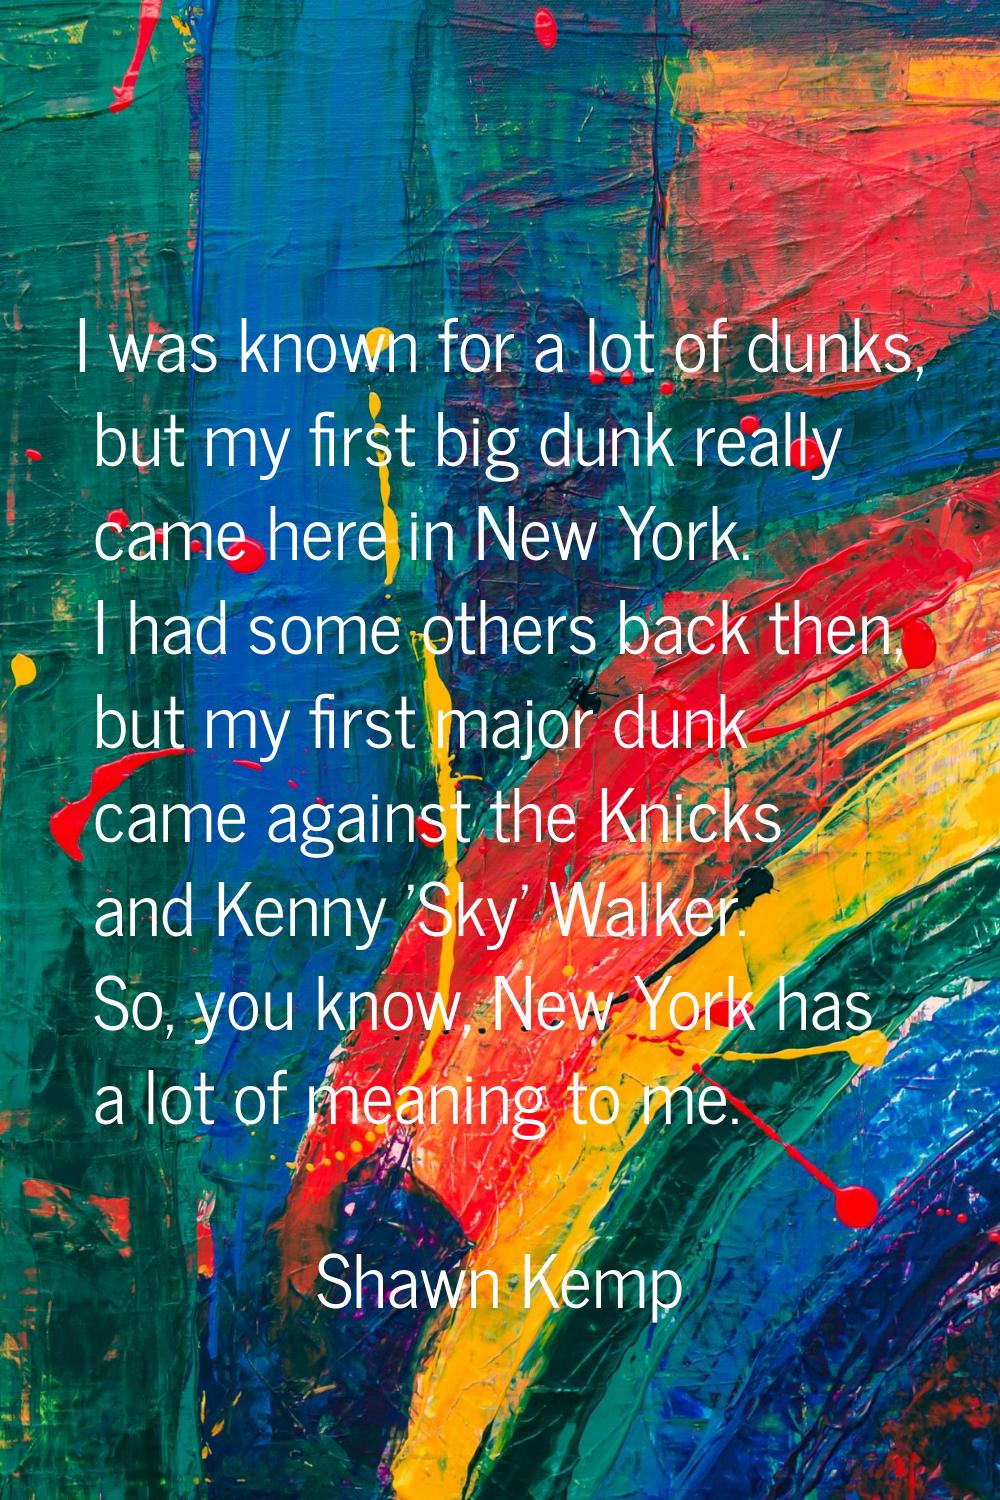 I was known for a lot of dunks, but my first big dunk really came here in New York. I had some othe